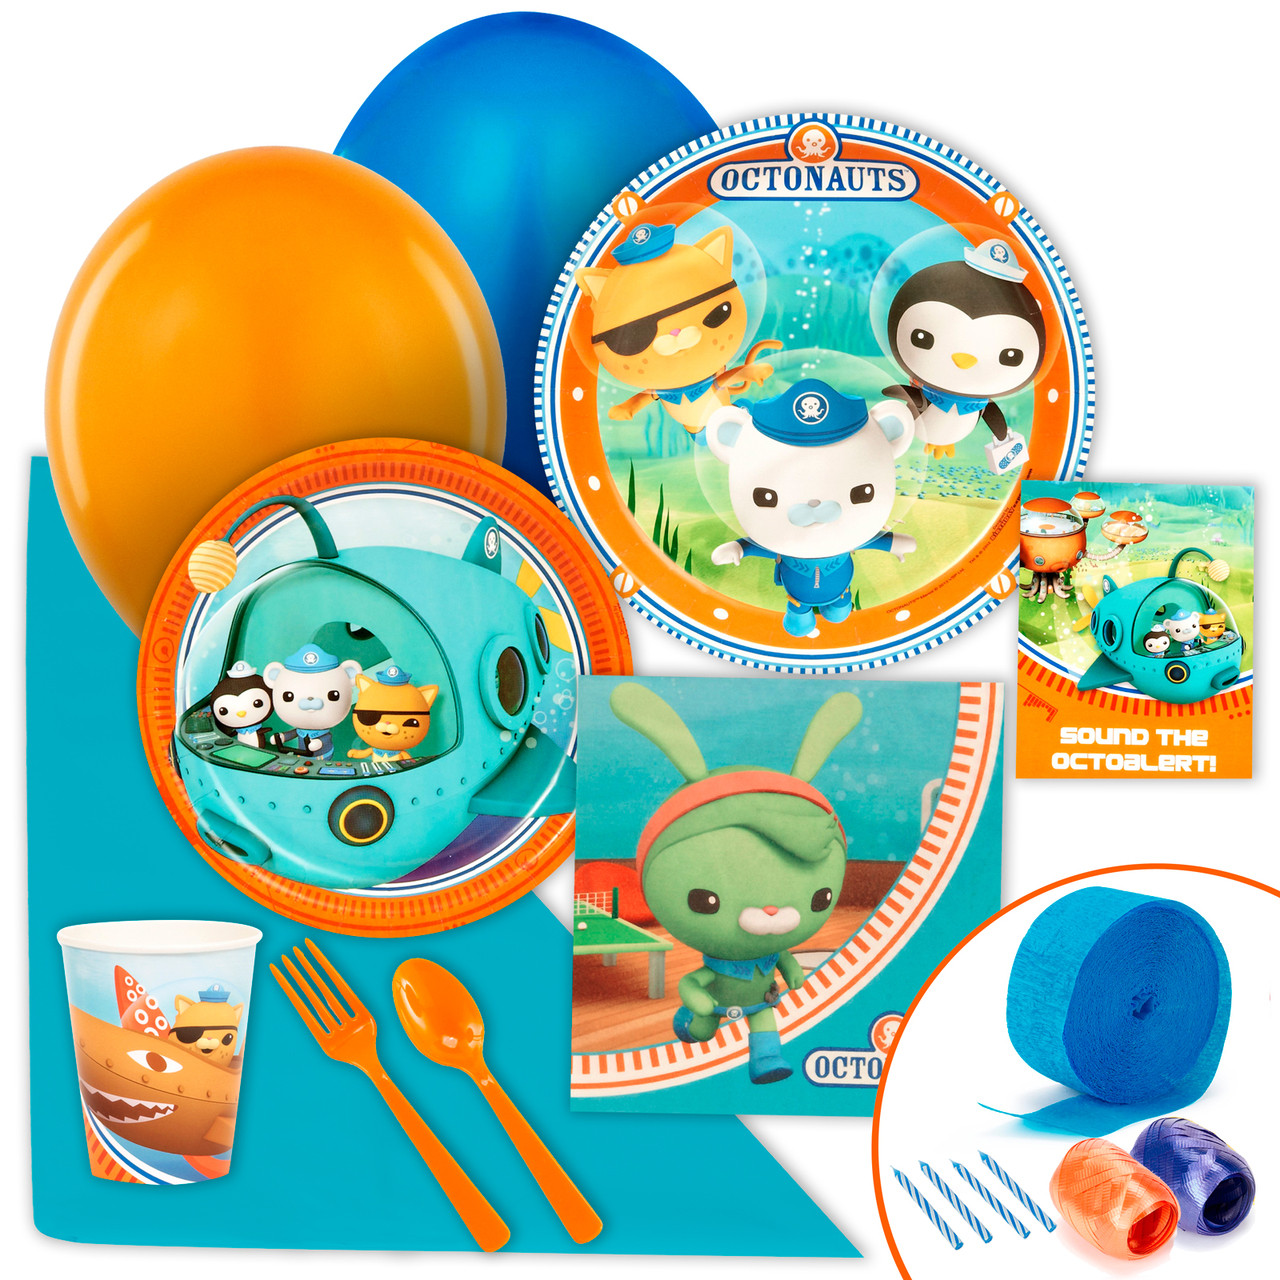 New Nickelodeon Bubble Guppies Kids Fork and Spoon Set Cartoonist Blue